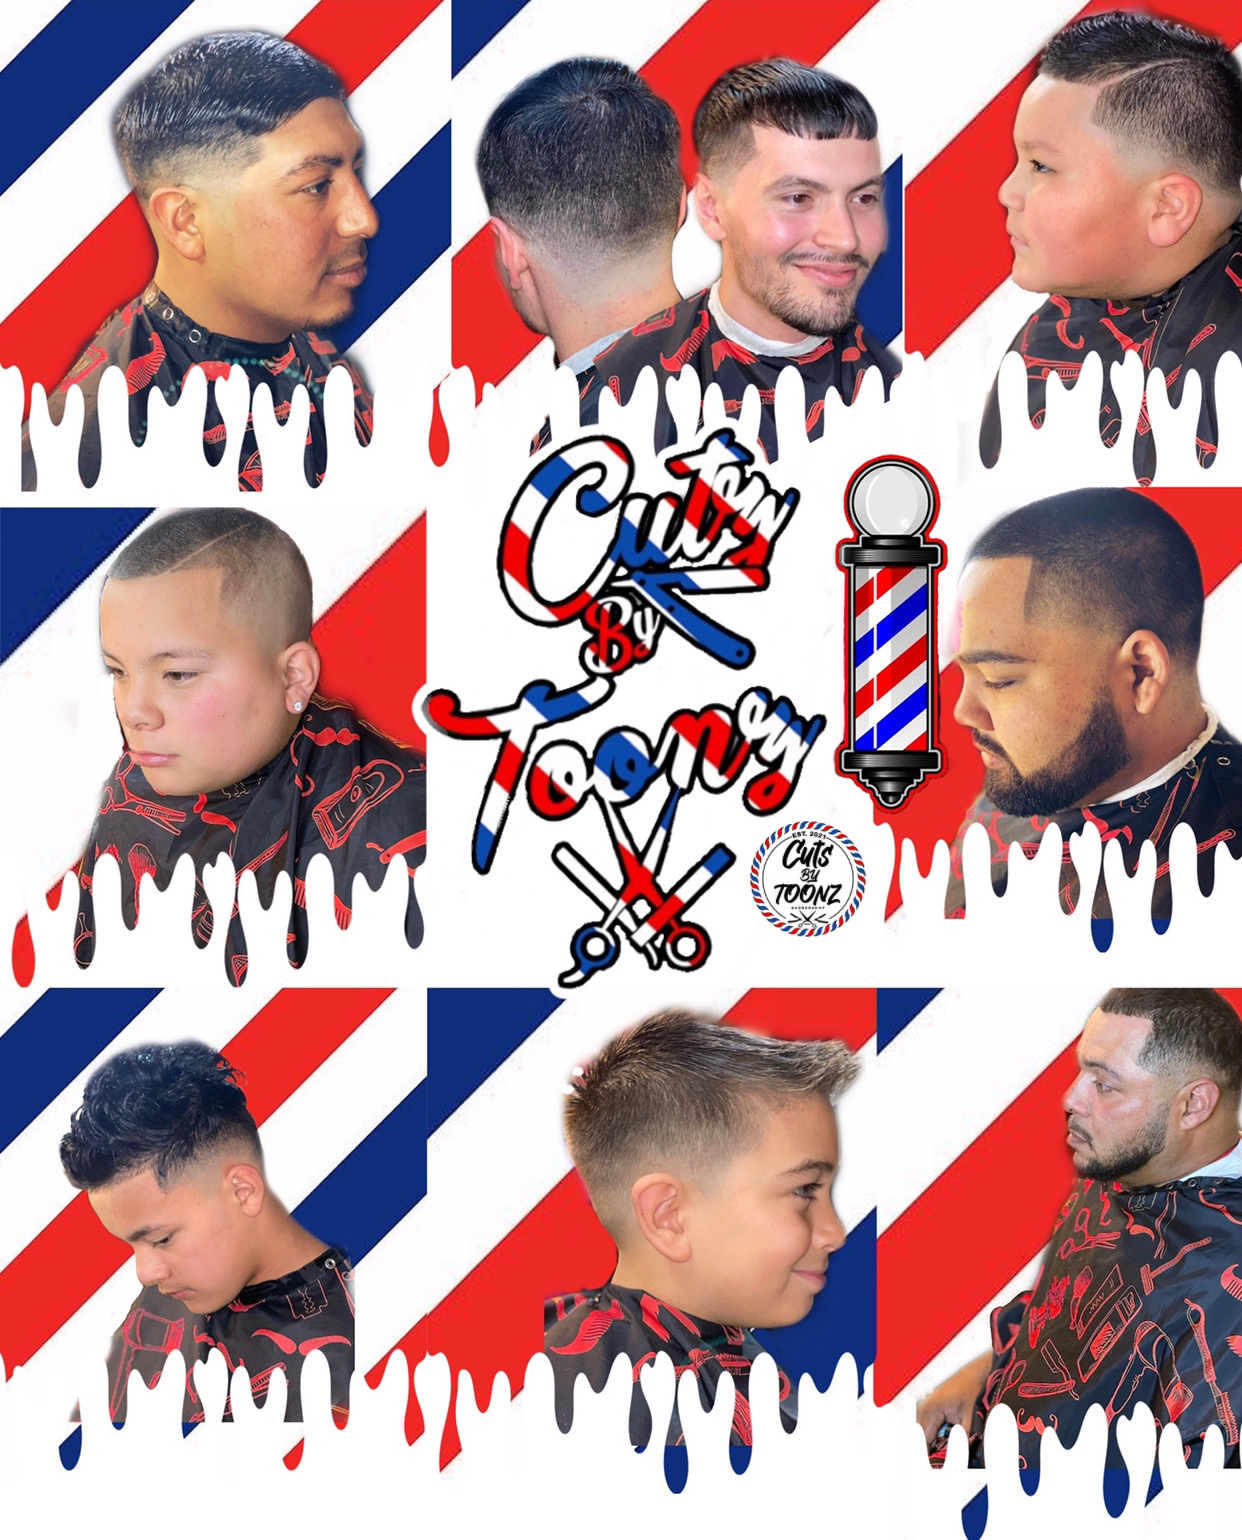 Cuts By Toonz Barbershop 912 E 3rd St, Sweetwater Texas 79556